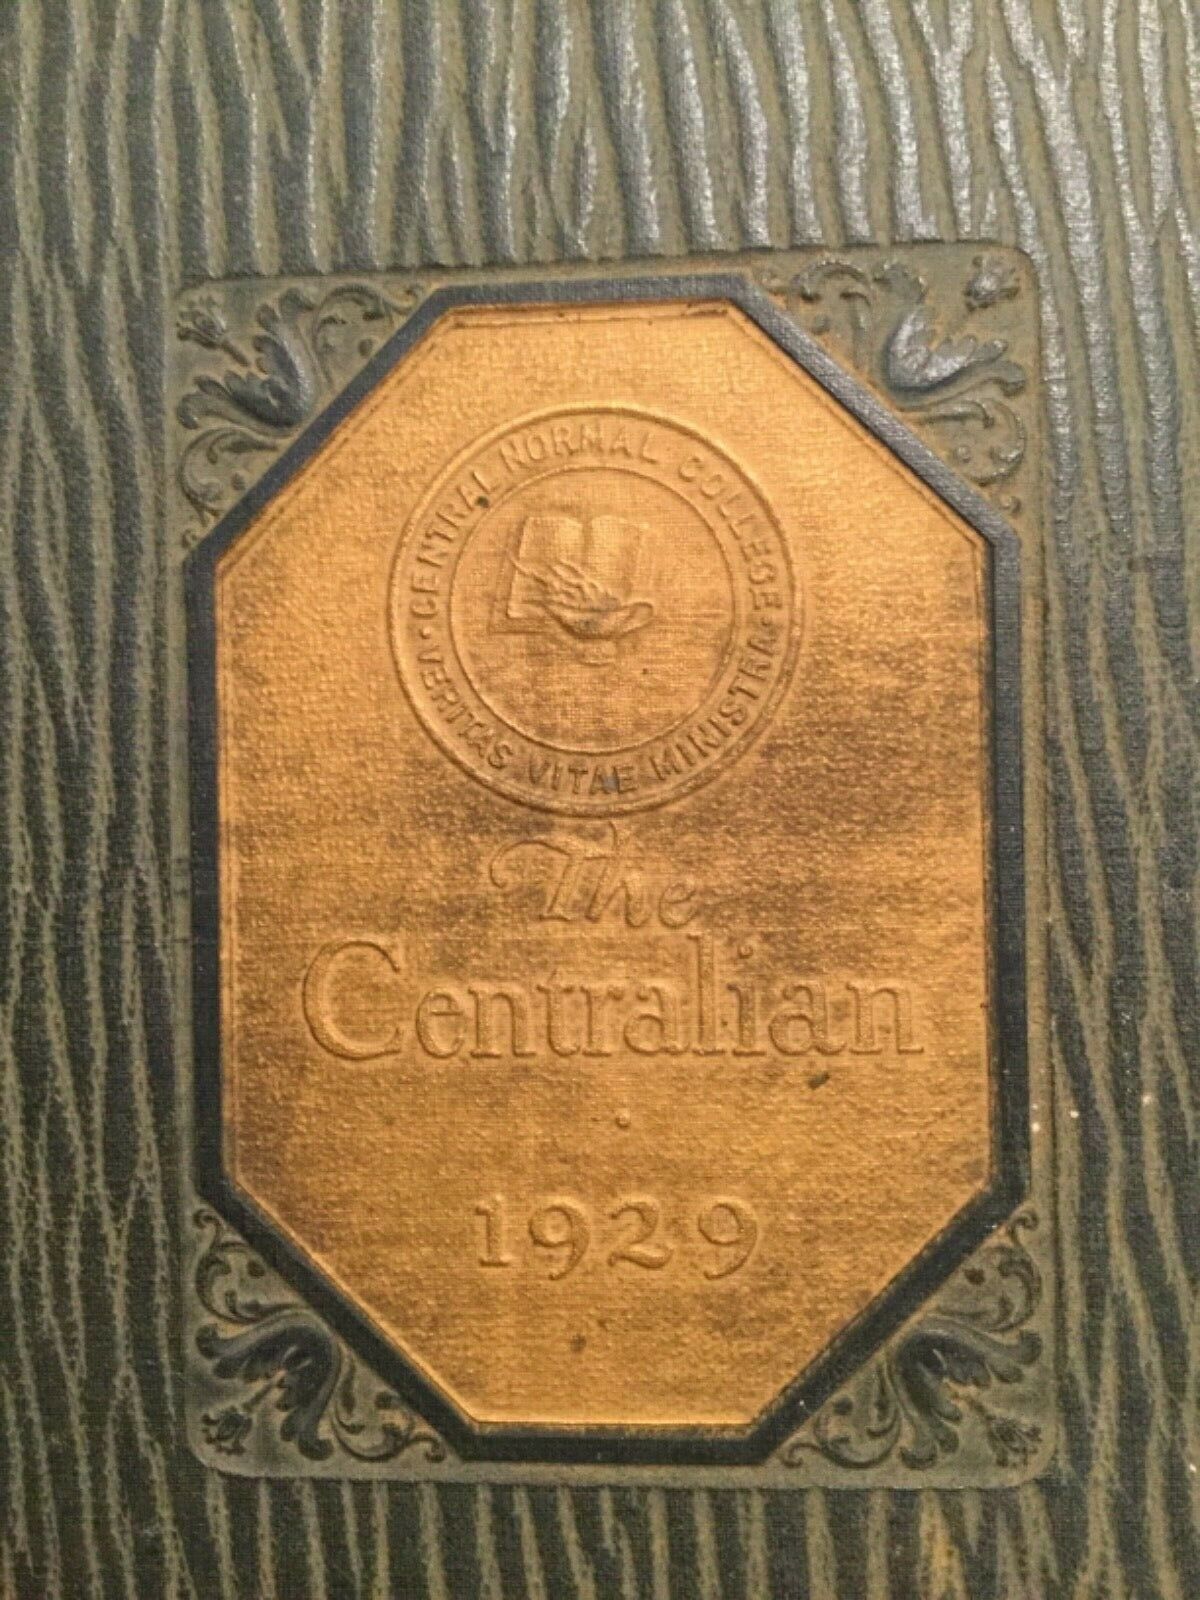 1929 Yearbook Central Normal College Danville In Now Canterbury With No Writing